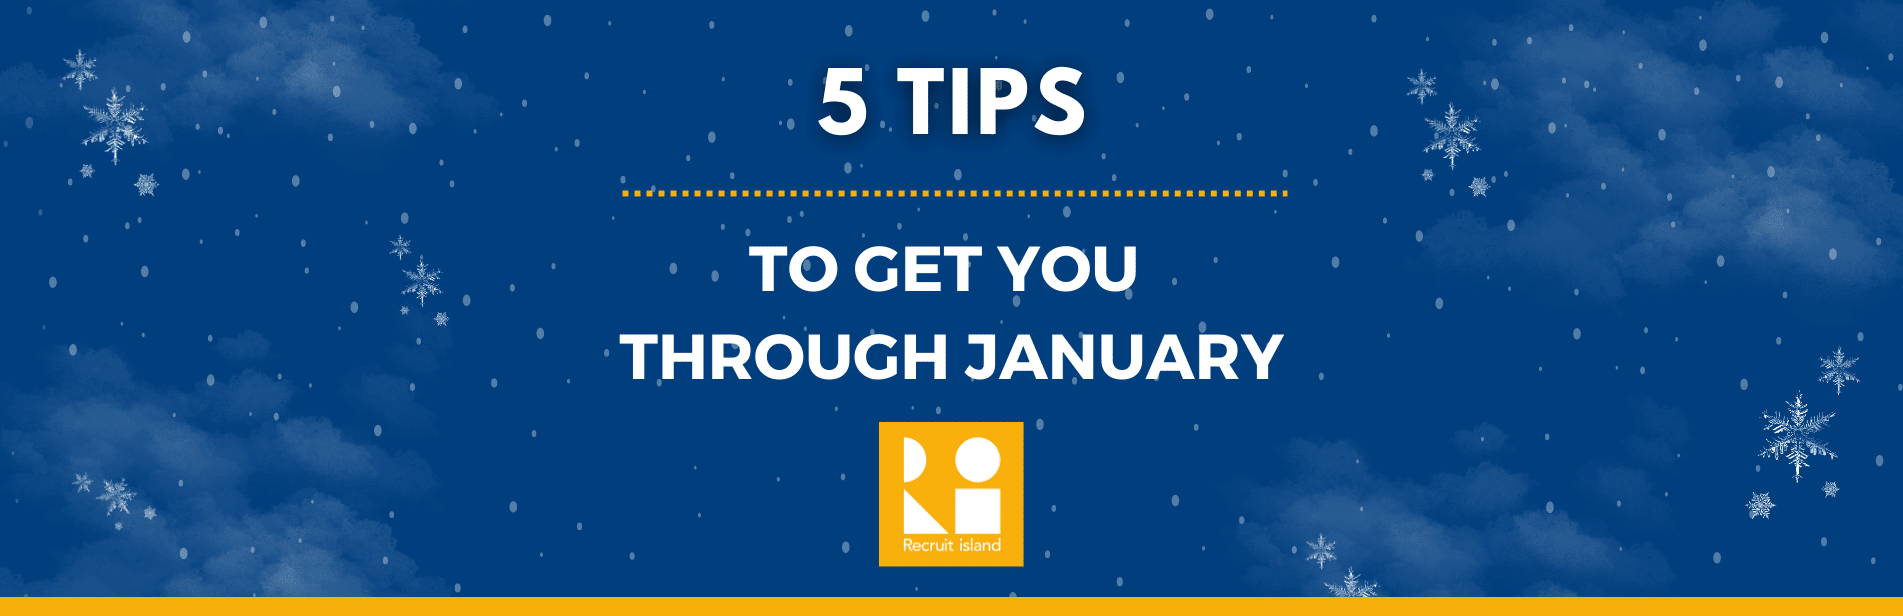 5 tips to get you through January